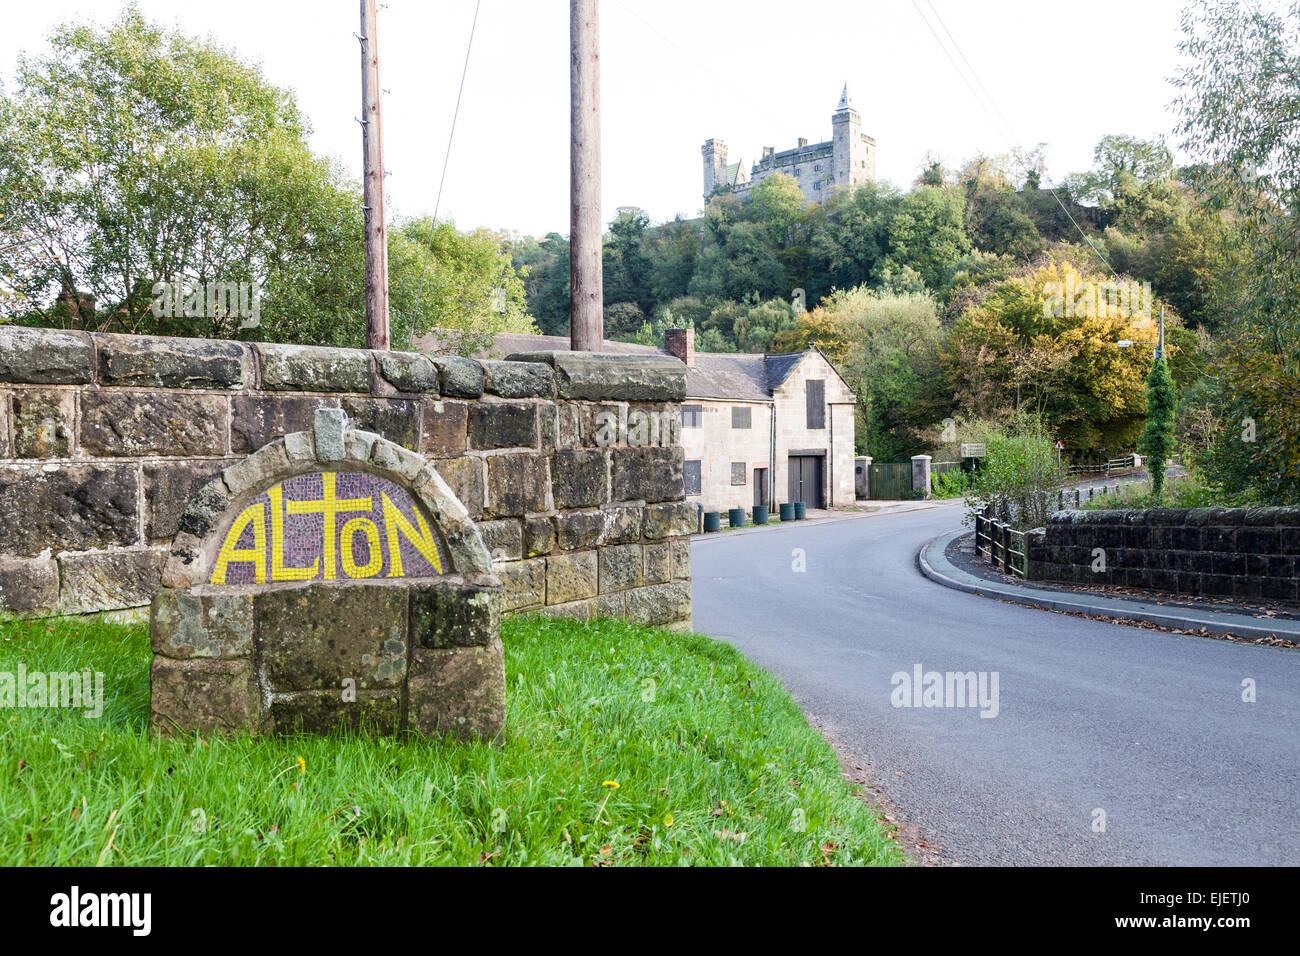 A village sign of Alton Staffordshire, the home of Alton Towers, with Alton castle in the background Stock Photo